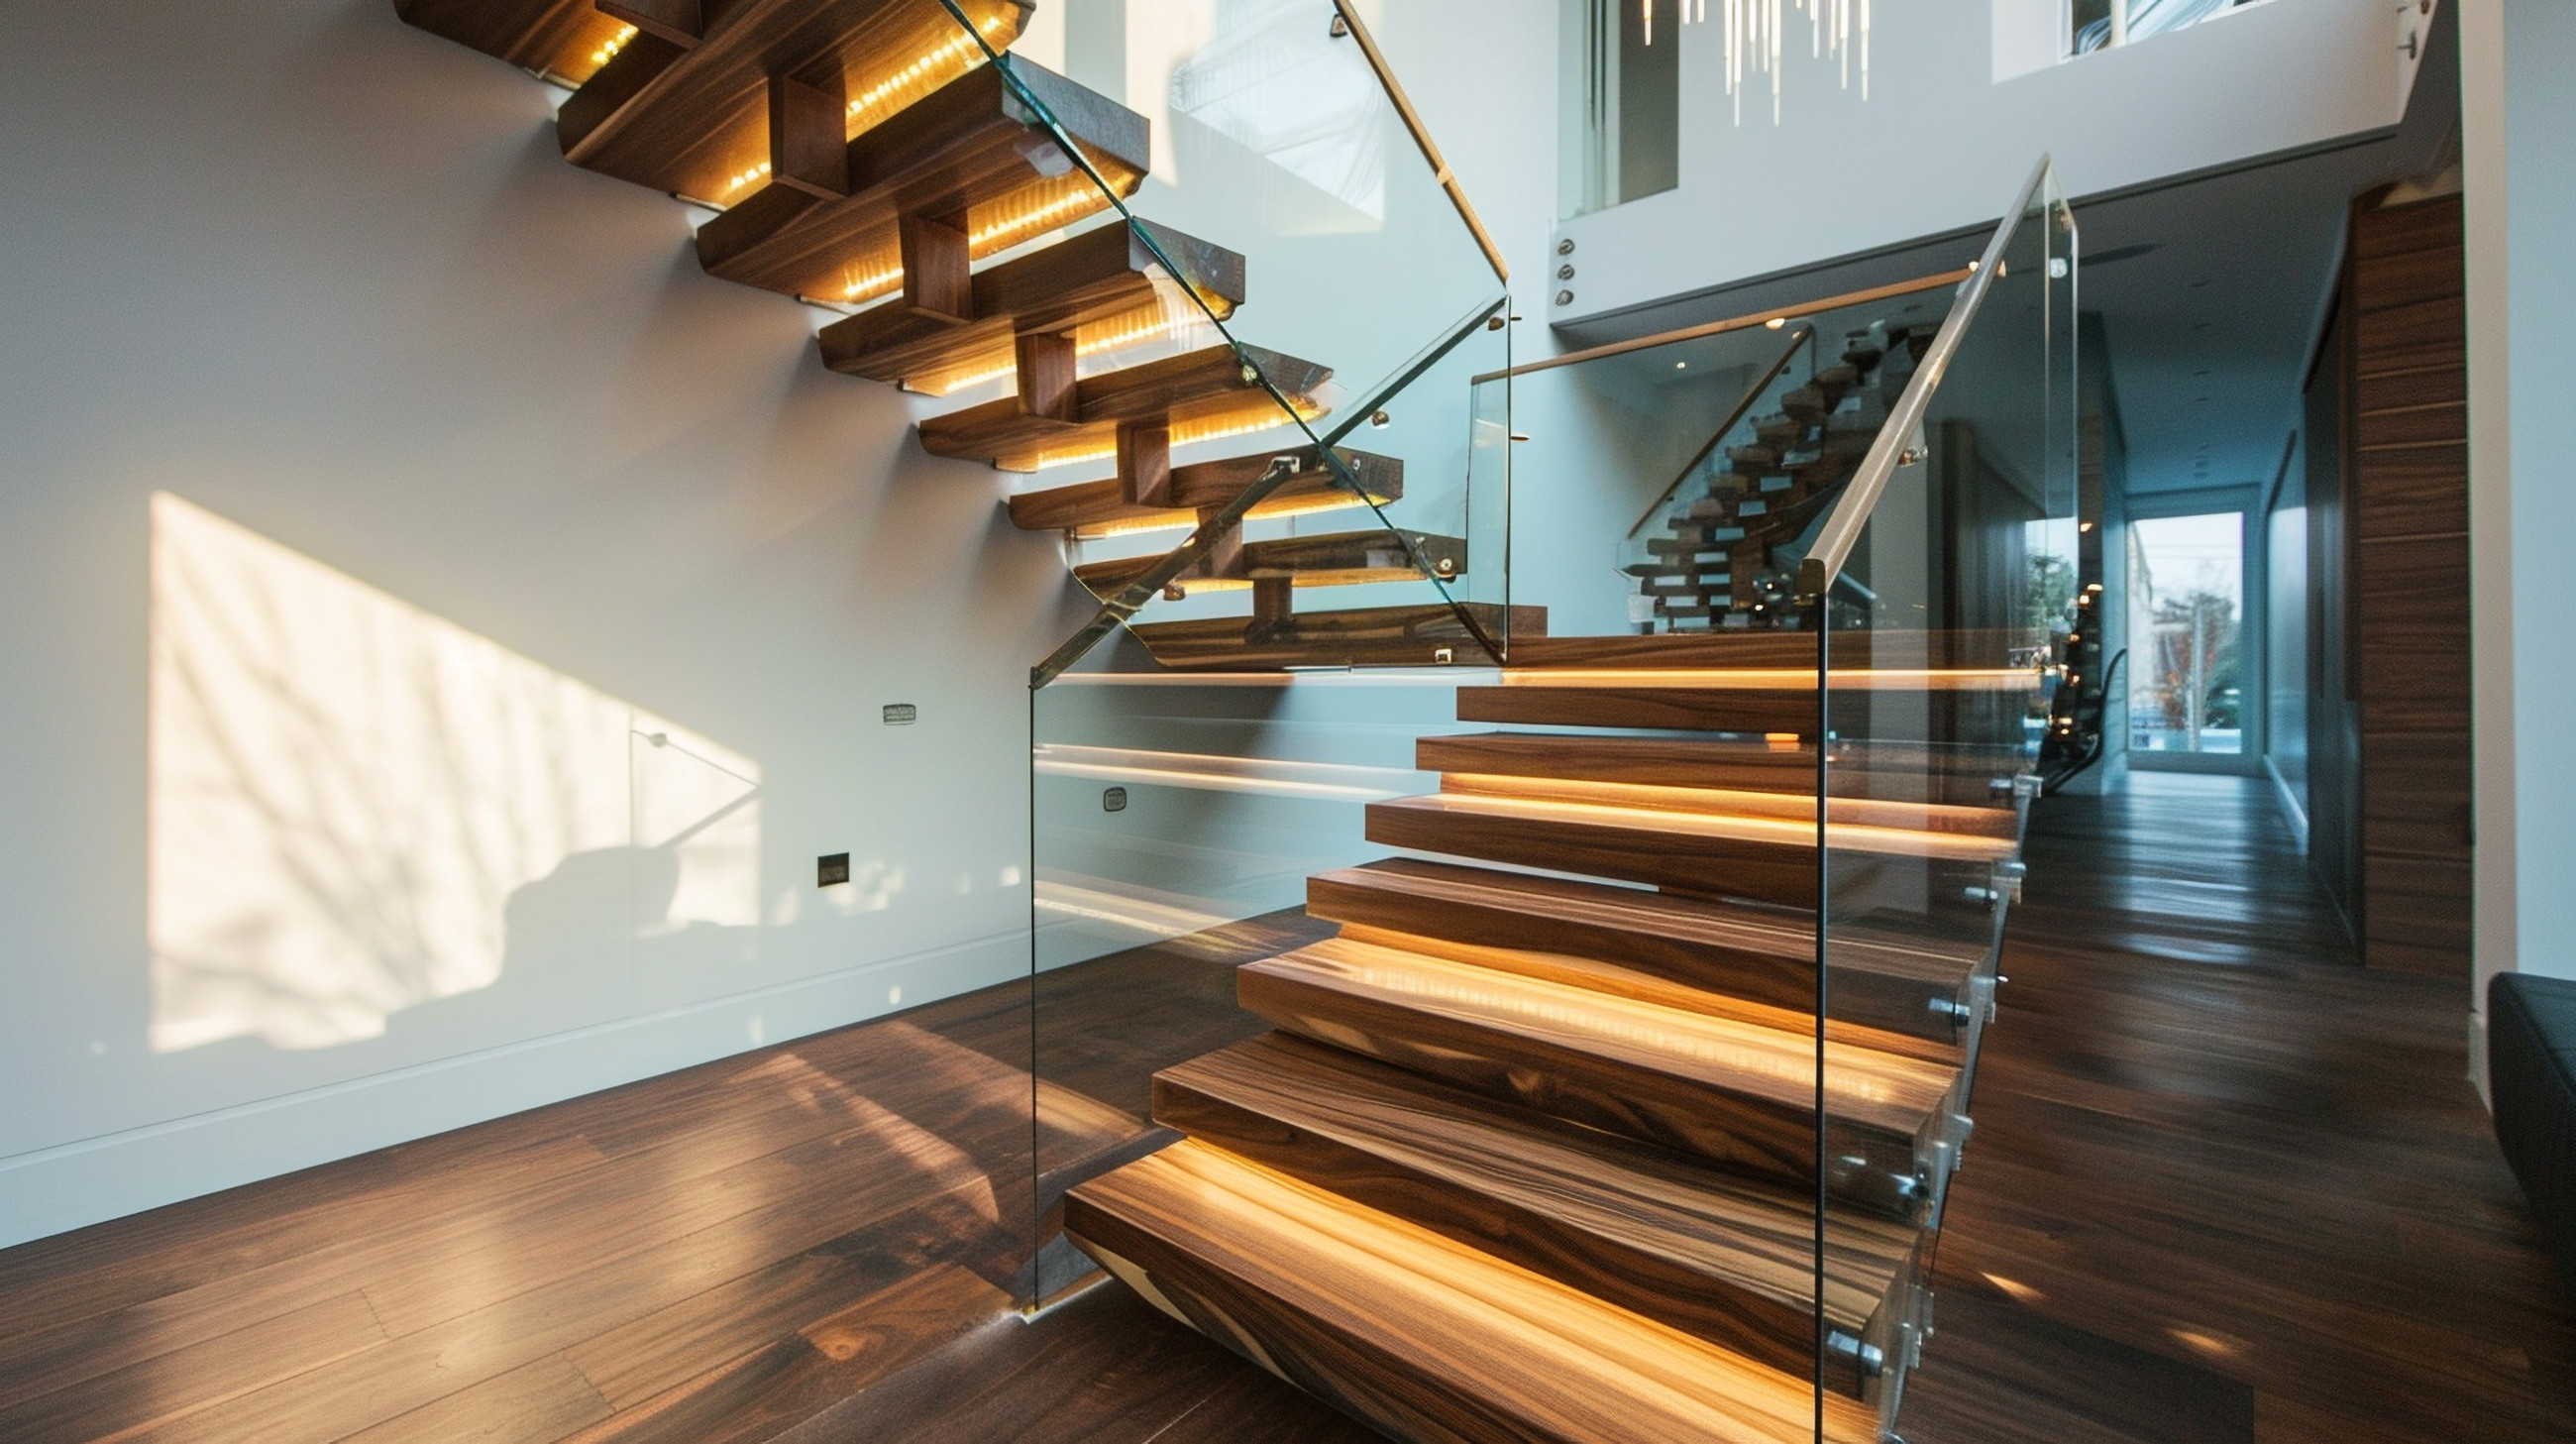 Timber-floored house with a glass balustrade